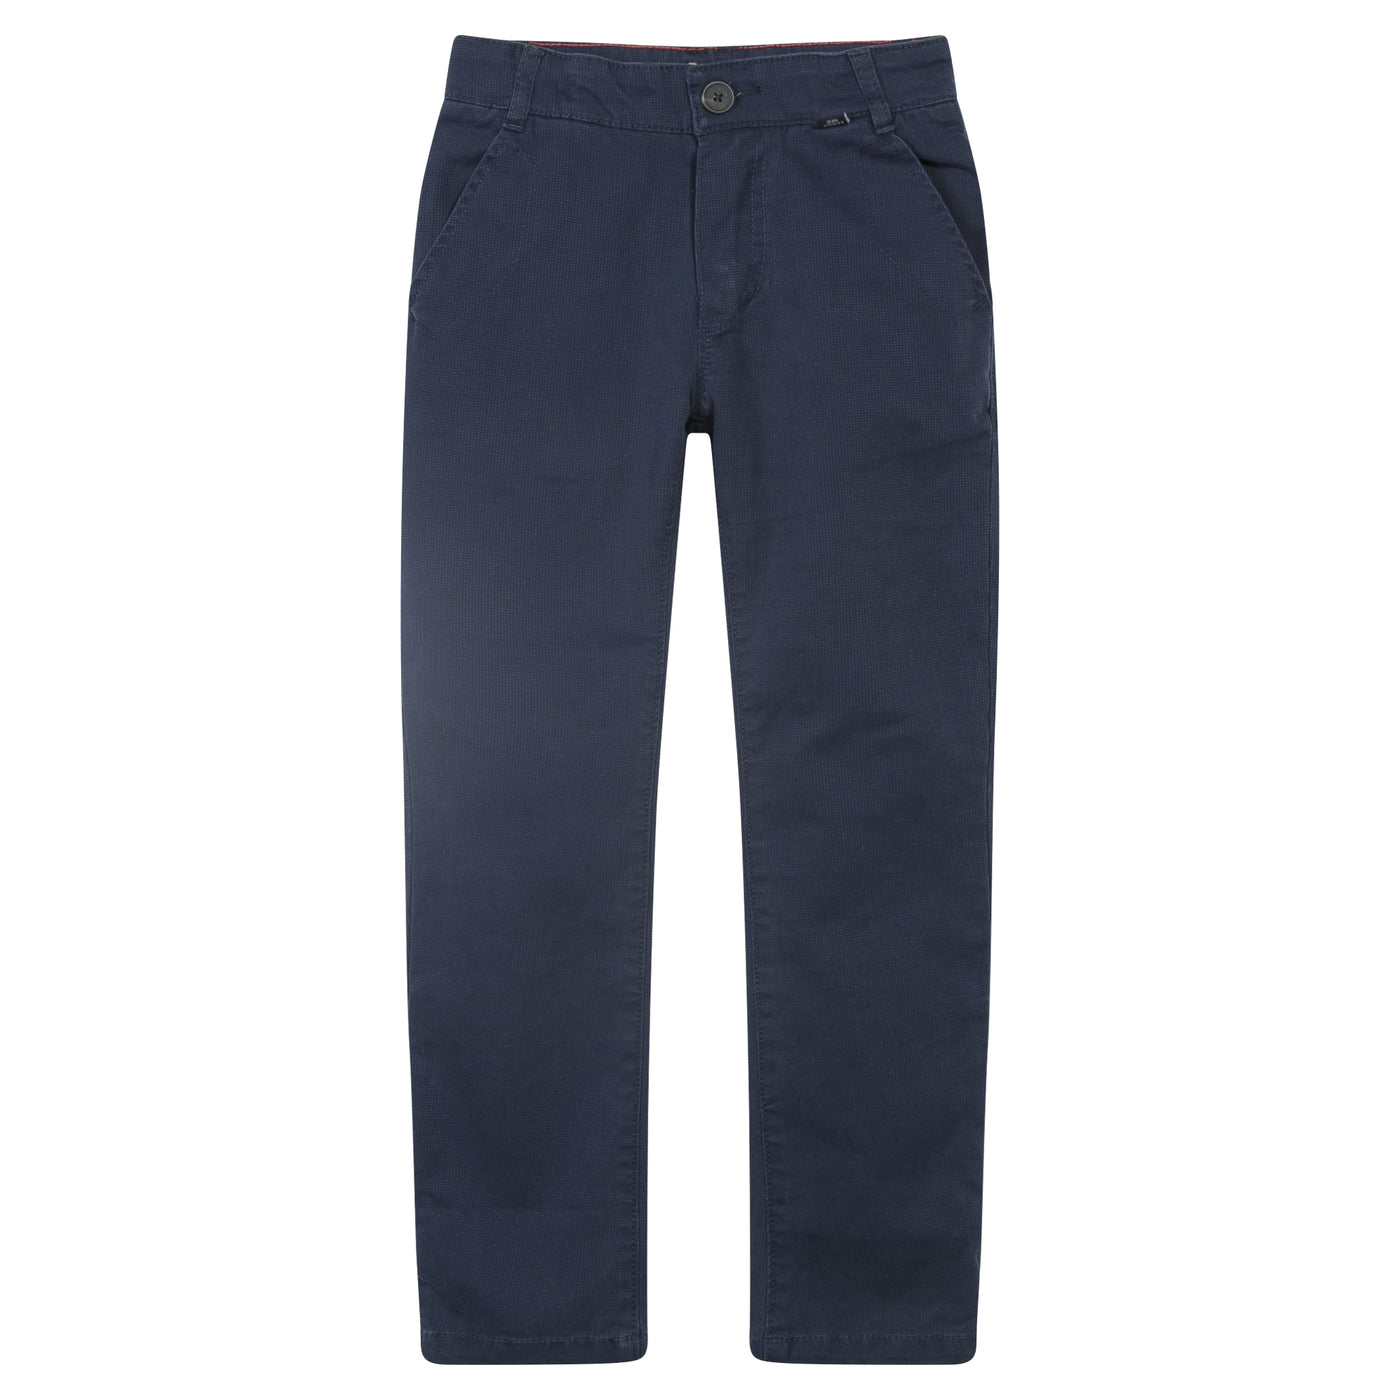 Jean Bourget Kids Boy's Chino Fit Pants in Navy